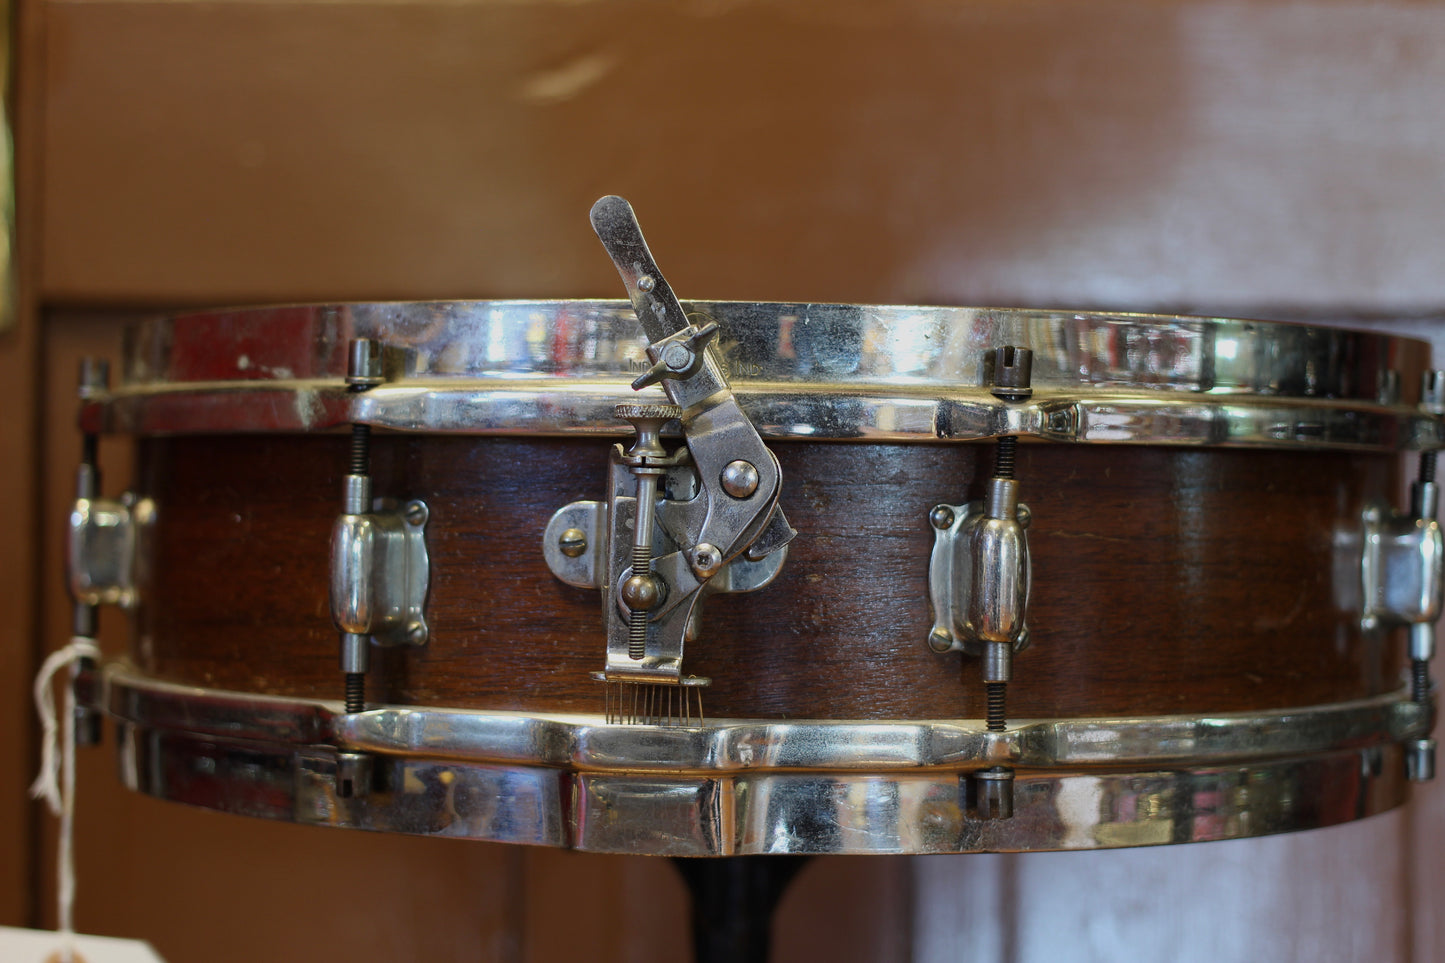 1920's Leedy 'Separate Tension' Snare Drum 4"x14" Solid Walnut